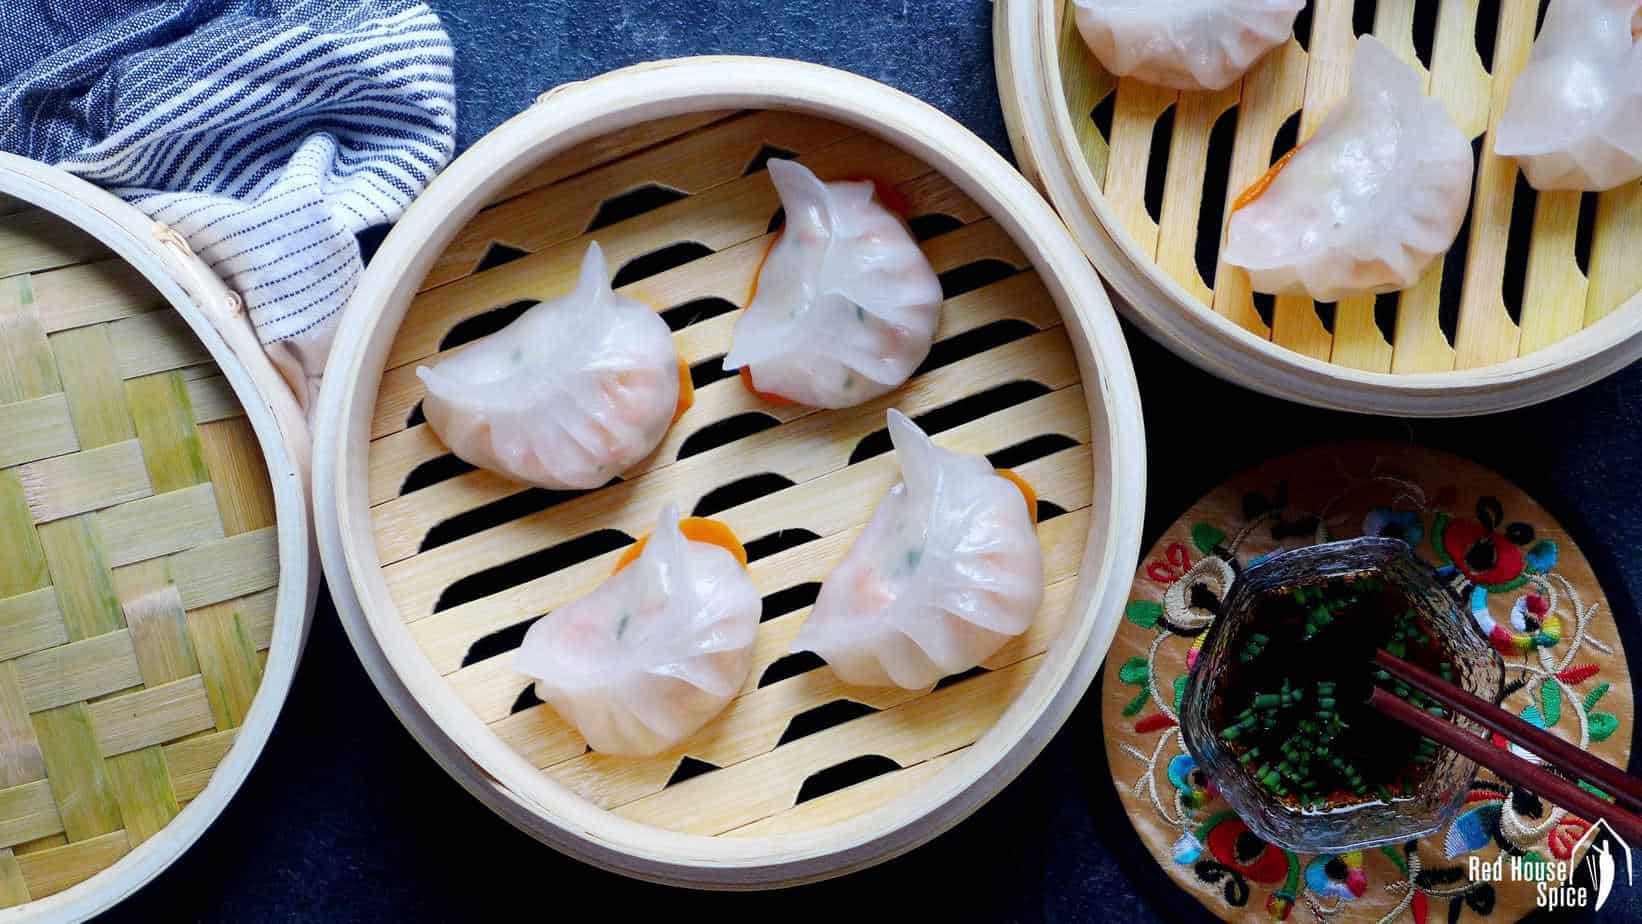 Juicy filling wrapped by a translucent skin, Har Gow (prawn dumplings) is a pleasure both on your palate and to your eyes. Read my detailed recipe to learn how to make it perfectly.